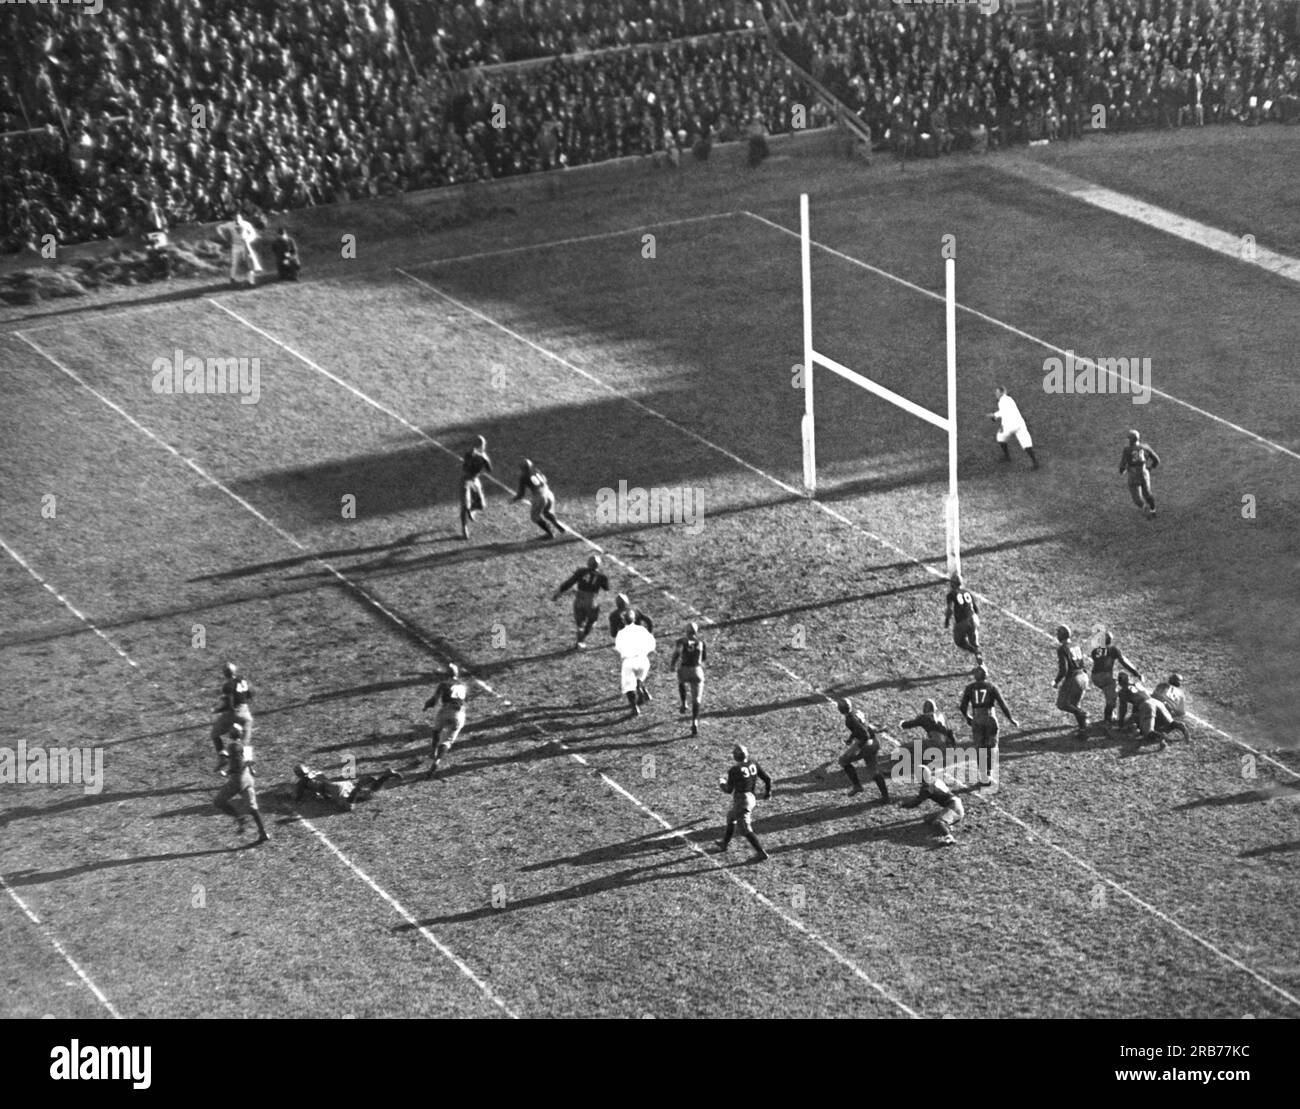 Boston, Massachusetts:  November 21, 1925 Yale attempting a foward pass during the game against Harvard at Soldiers Field. The game ended in a scoreless tie. Stock Photo